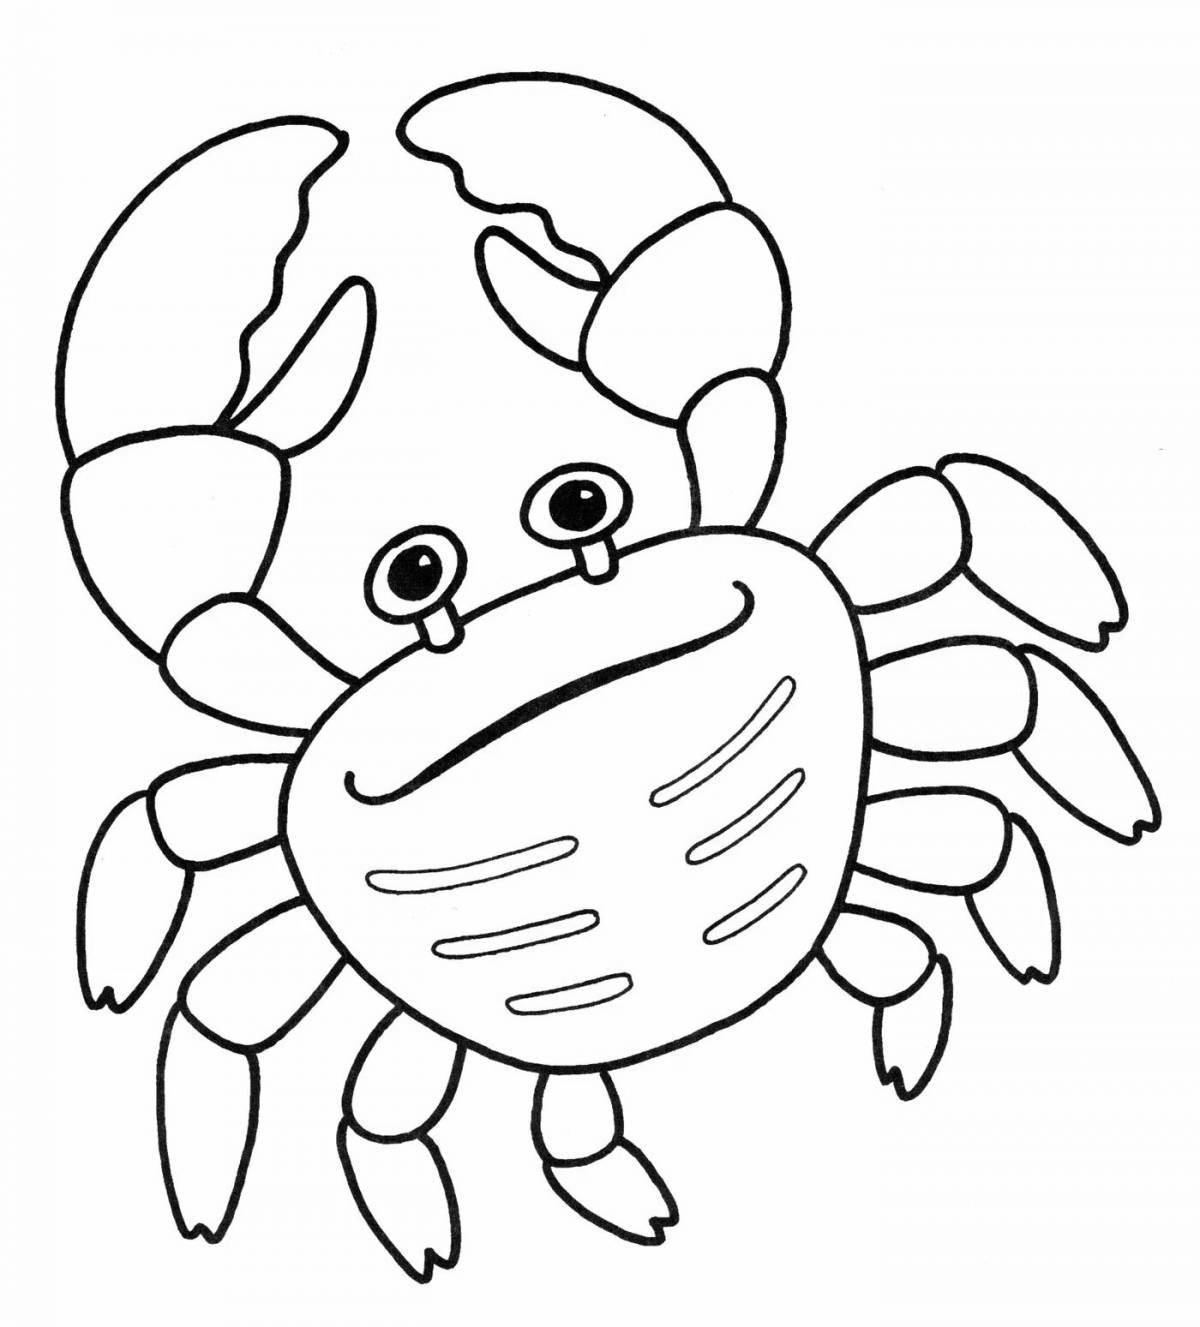 Creative crab coloring for kids